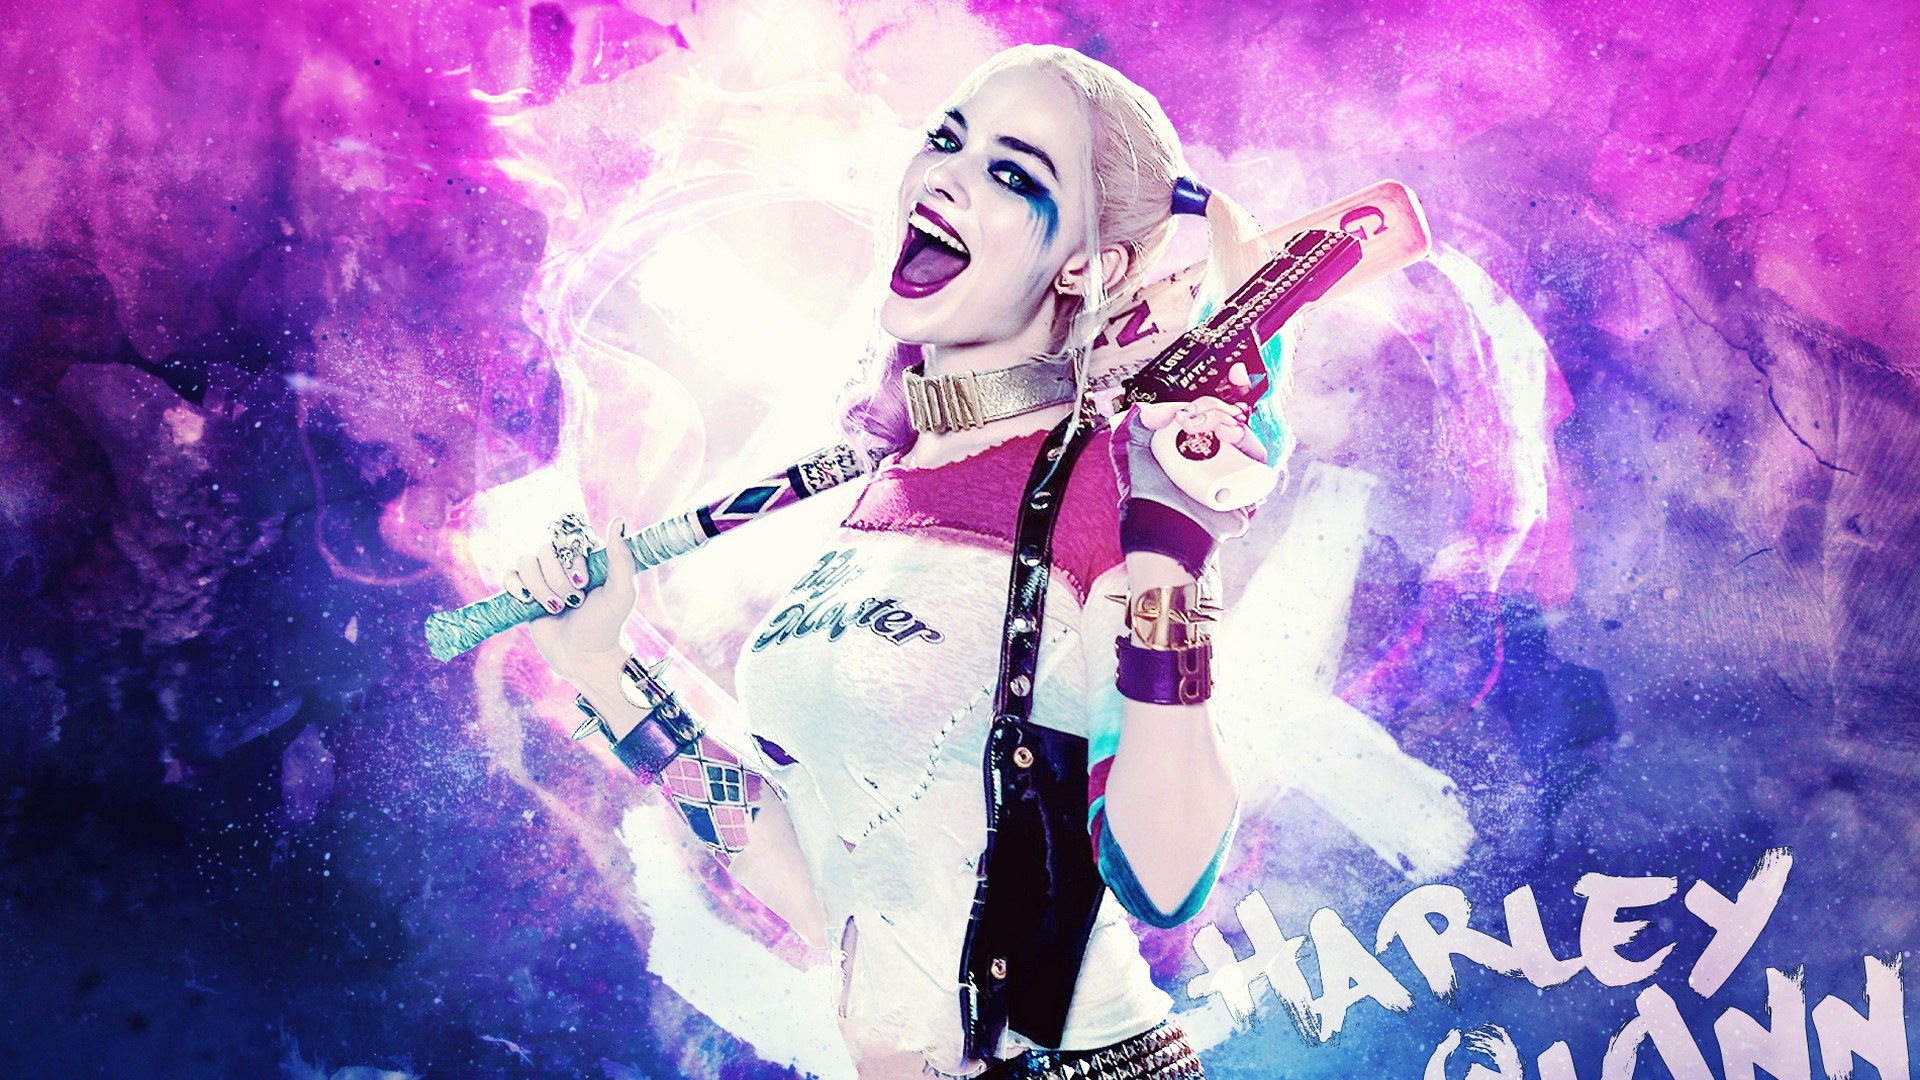 Harley Quinn Wallpaper with resolution 1920X1080 pixel. You can use this wallpaper as background for your desktop Computer Screensavers, Android or iPhone smartphones